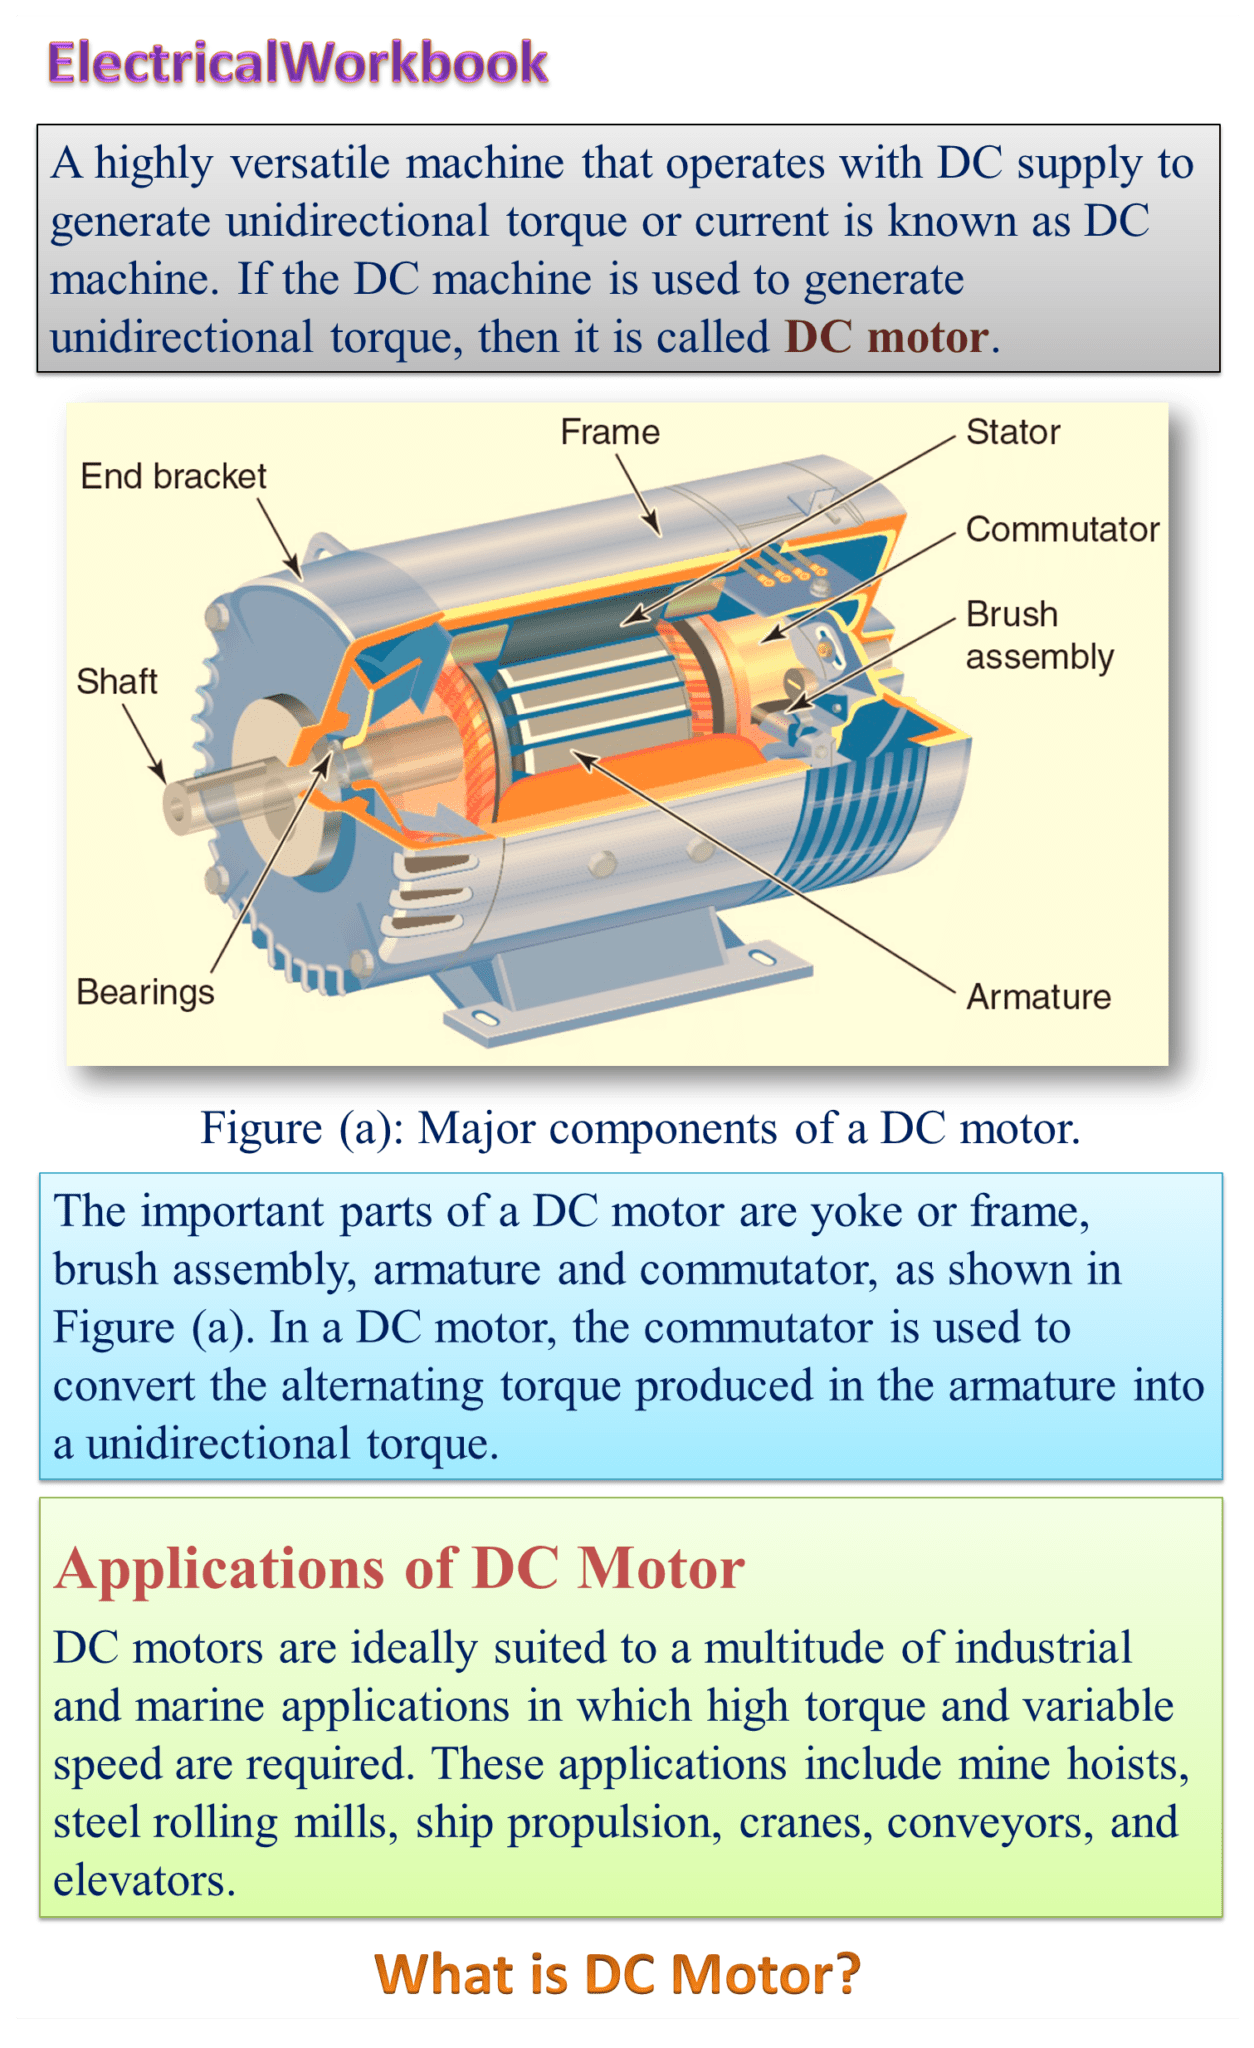 What is DC Motor